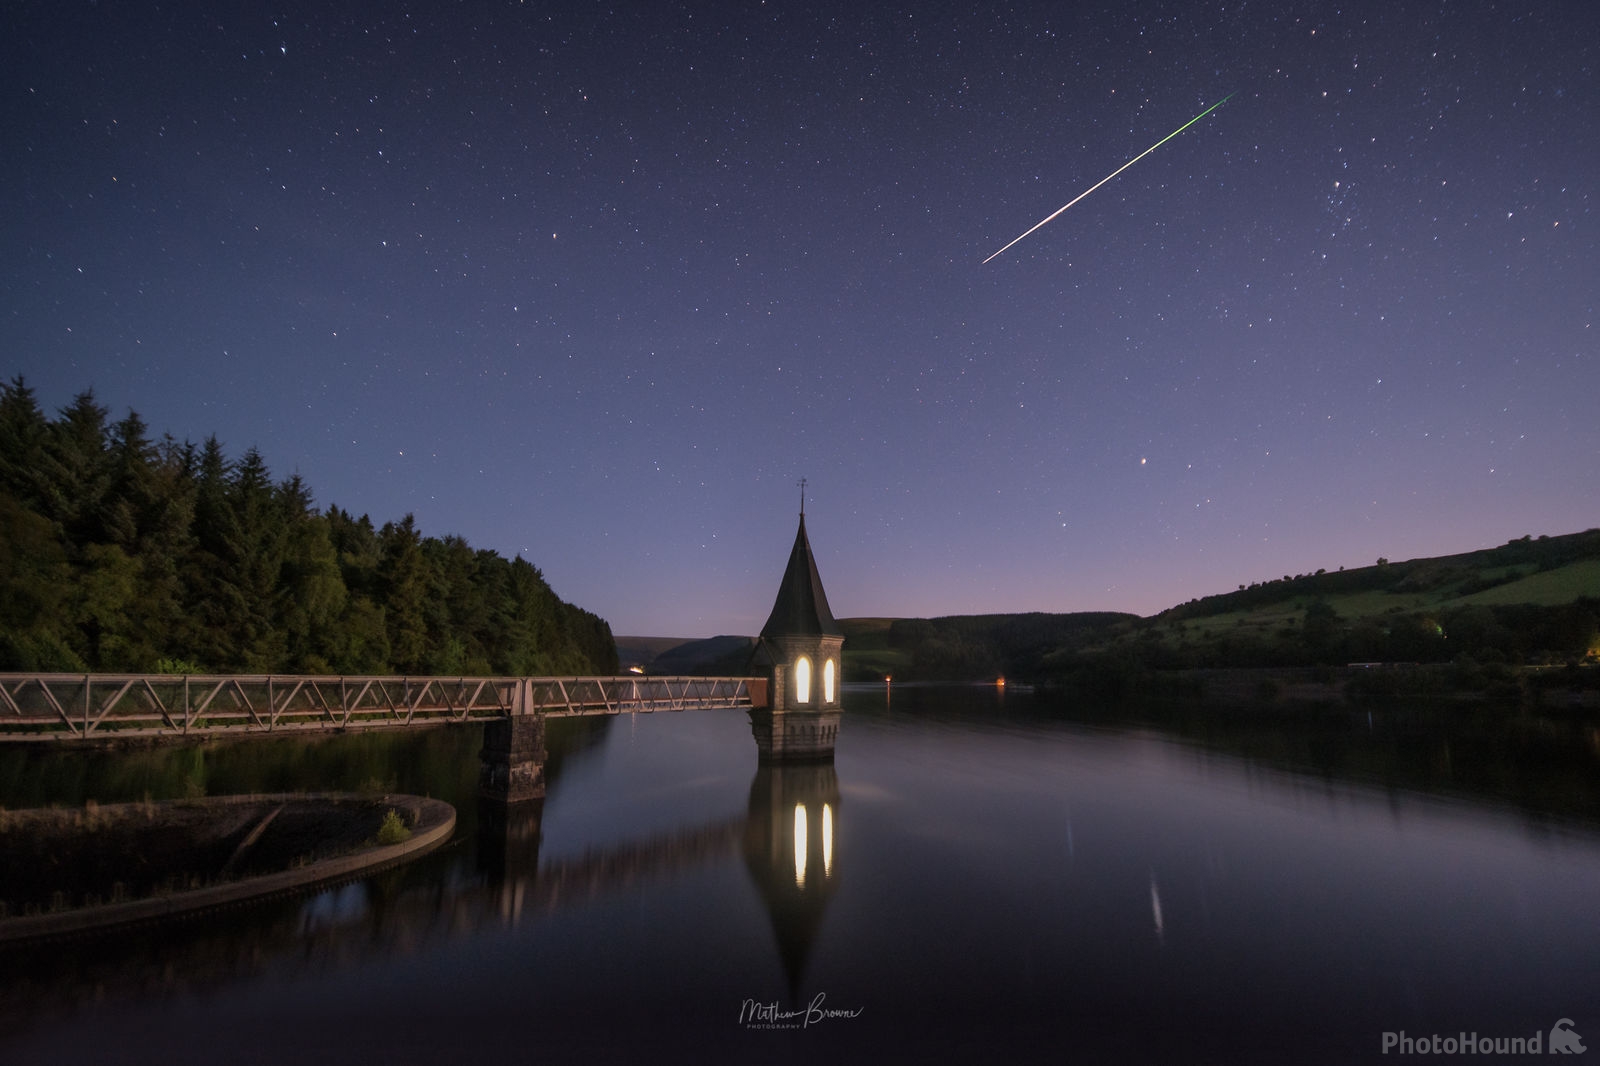 Image of Pontsticill Reservoir by Mathew Browne